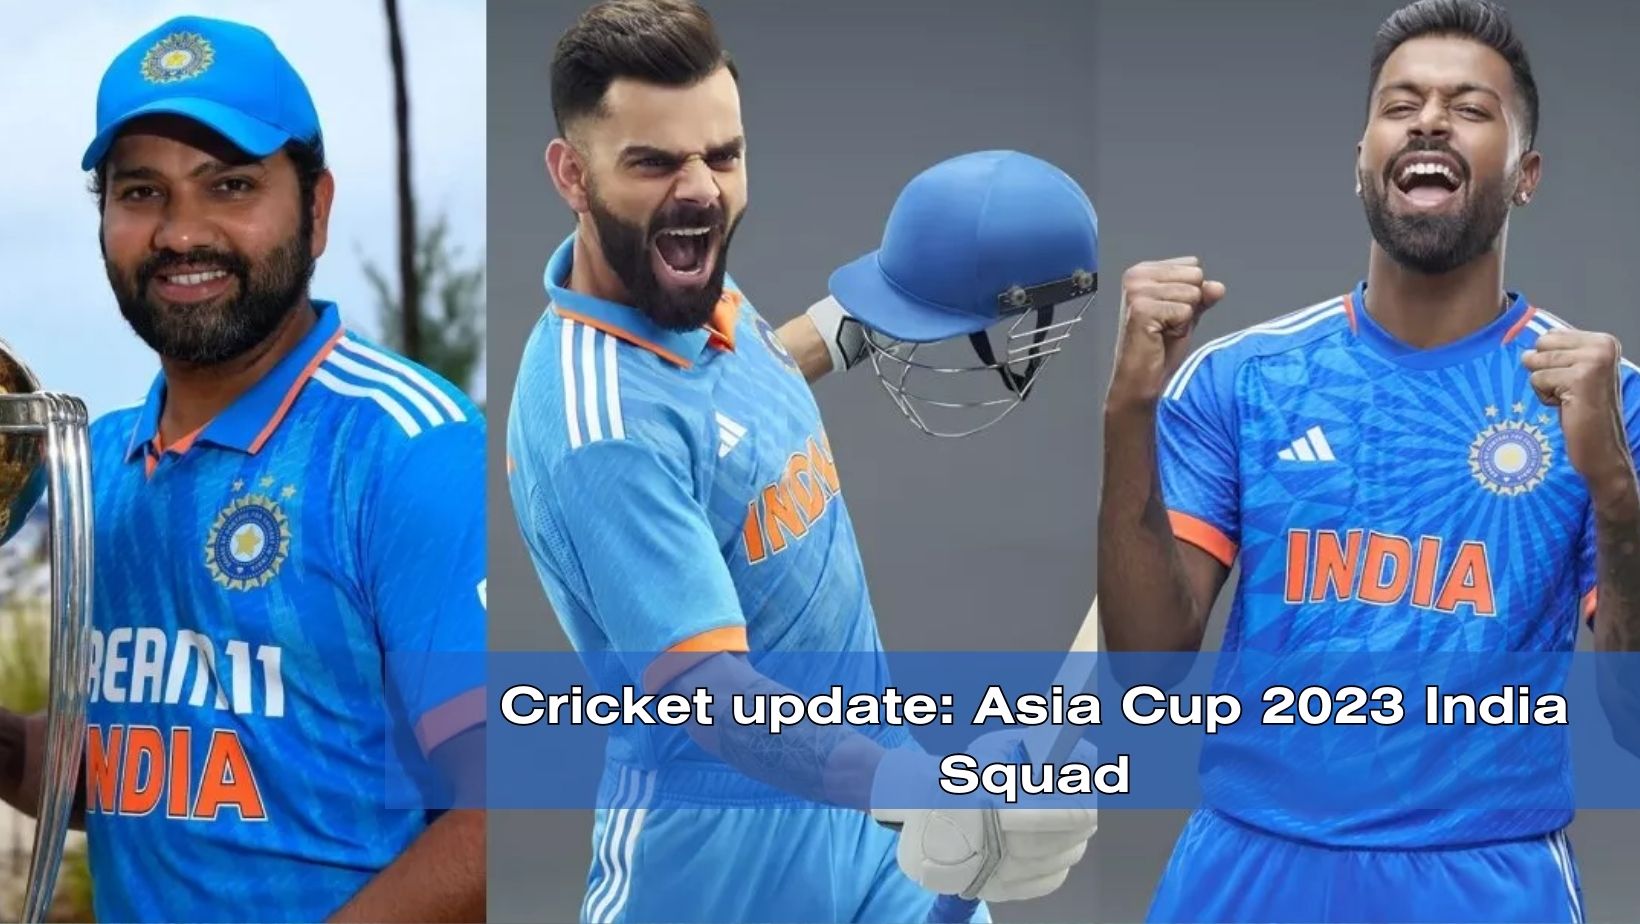 Cricket update: Asia Cup 2023 India Squad